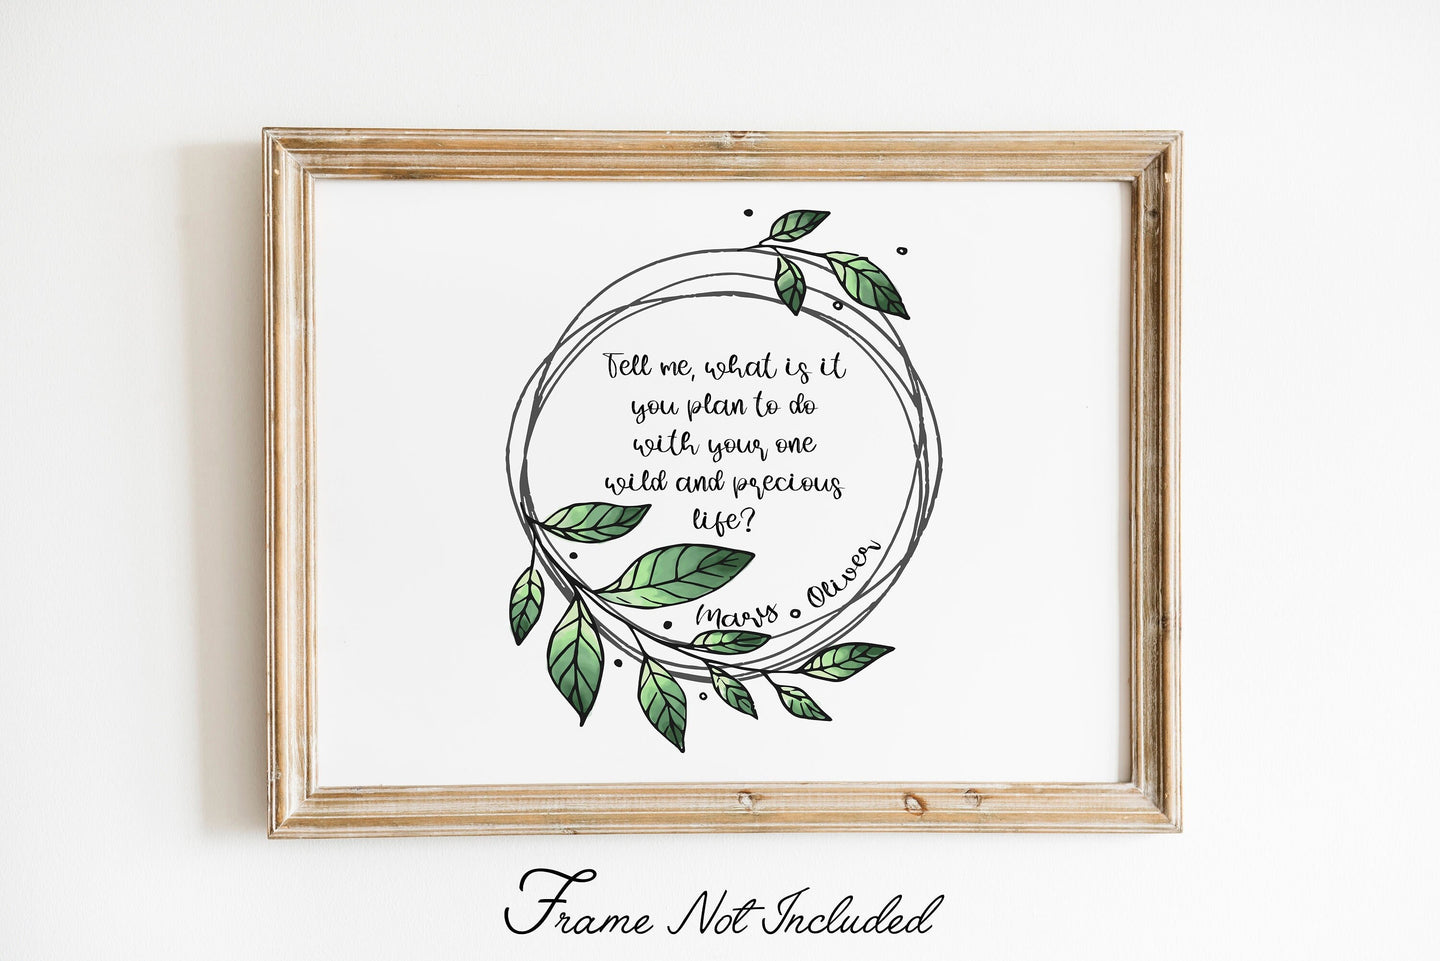 Tell me what is it you plan to do with your one wild and precious life? Poetry Wall Art